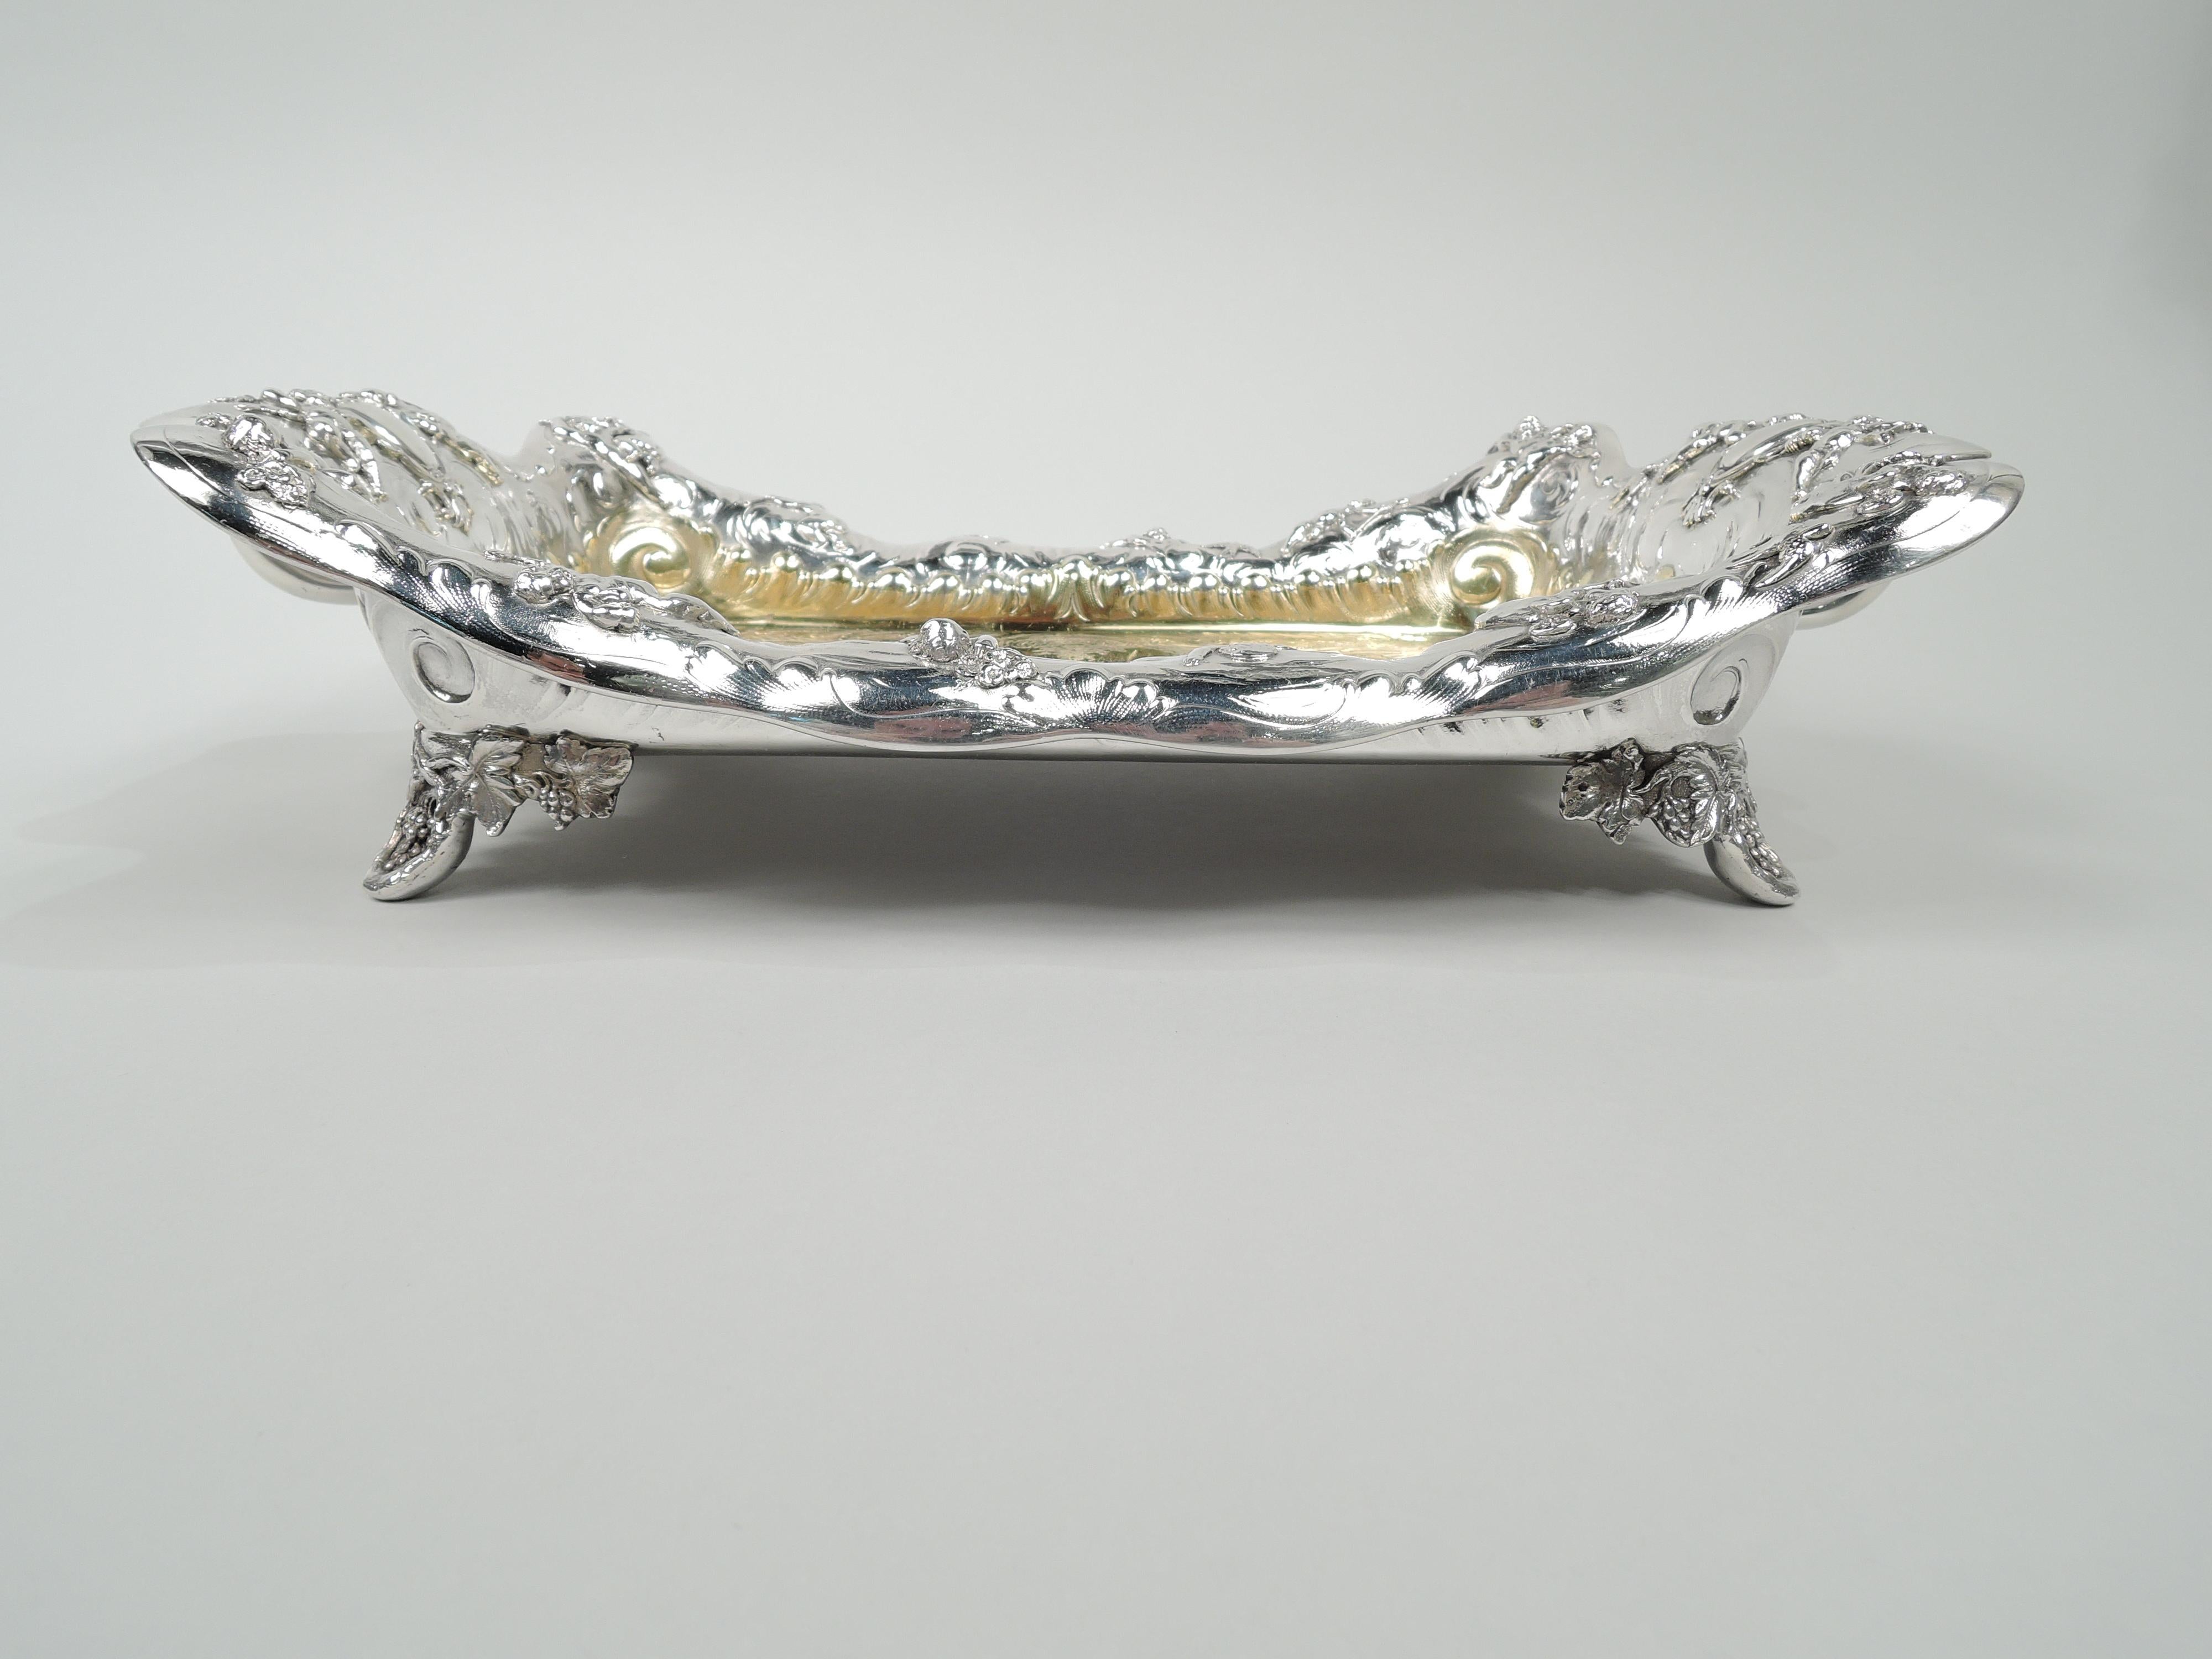 Sumptuous Victorian Classical sterling silver serving dish. Made by Tiffany & Co. in New York. Rectangular well and scrolling, asymmetrical turned-down rim; bracket-shaped ends with leaf-mounted scroll handles, and corner fruiting grapevine